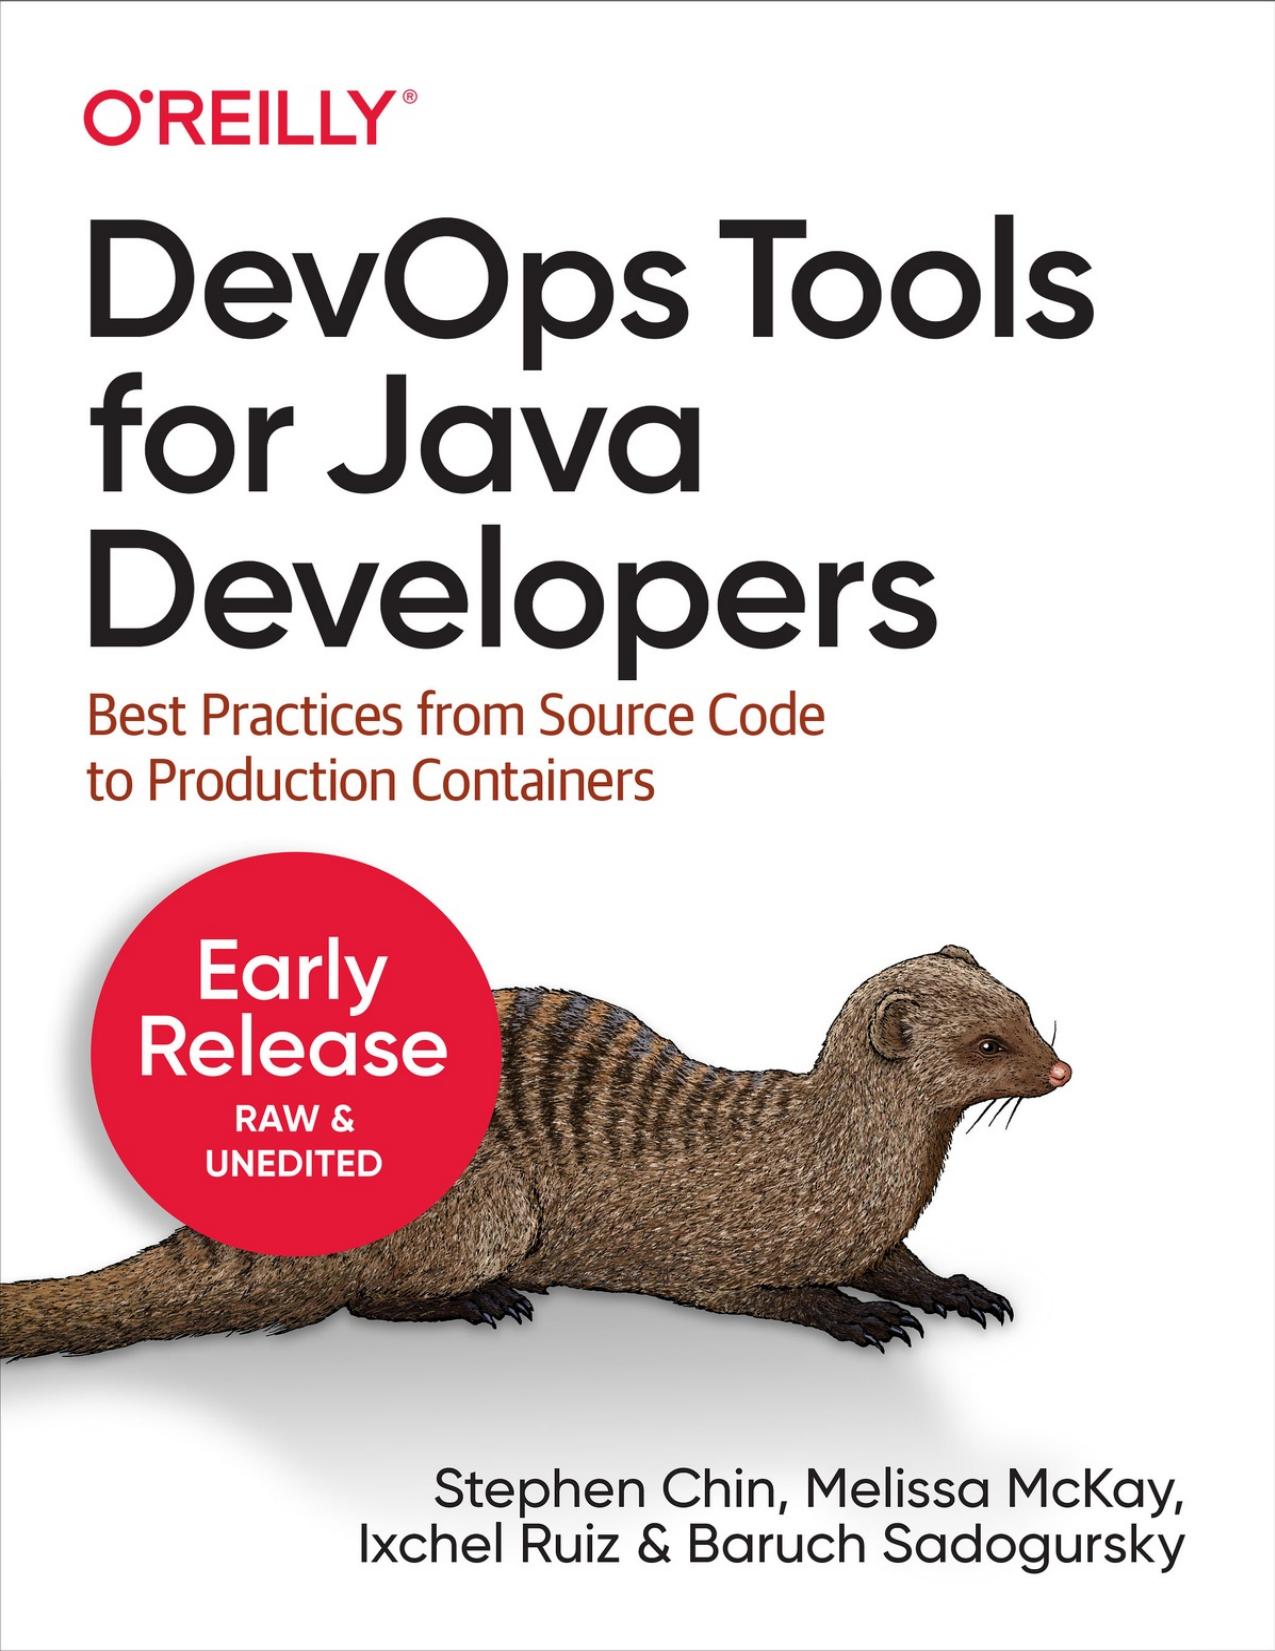 DevOps Tools for Java Developers: Best Practices From Source Code to Production Containers